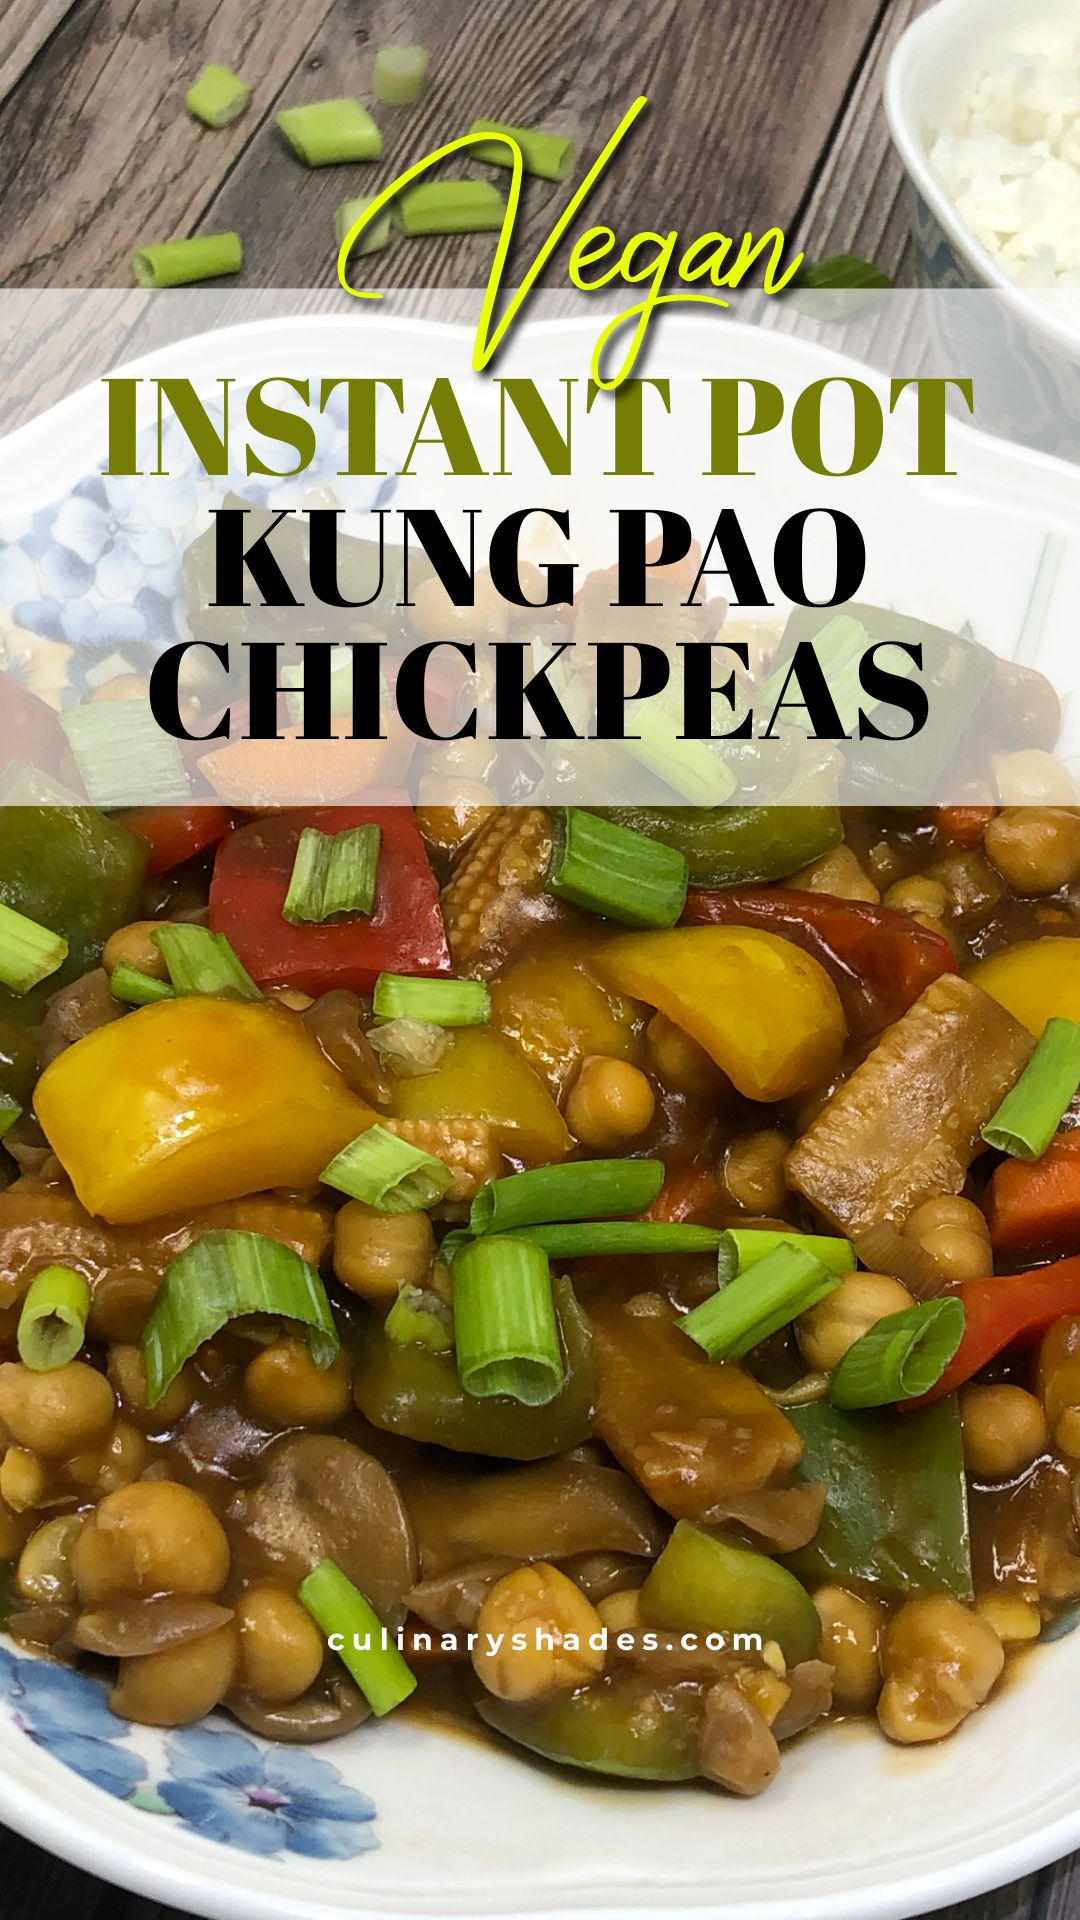 Kung pao in a serving bowl.